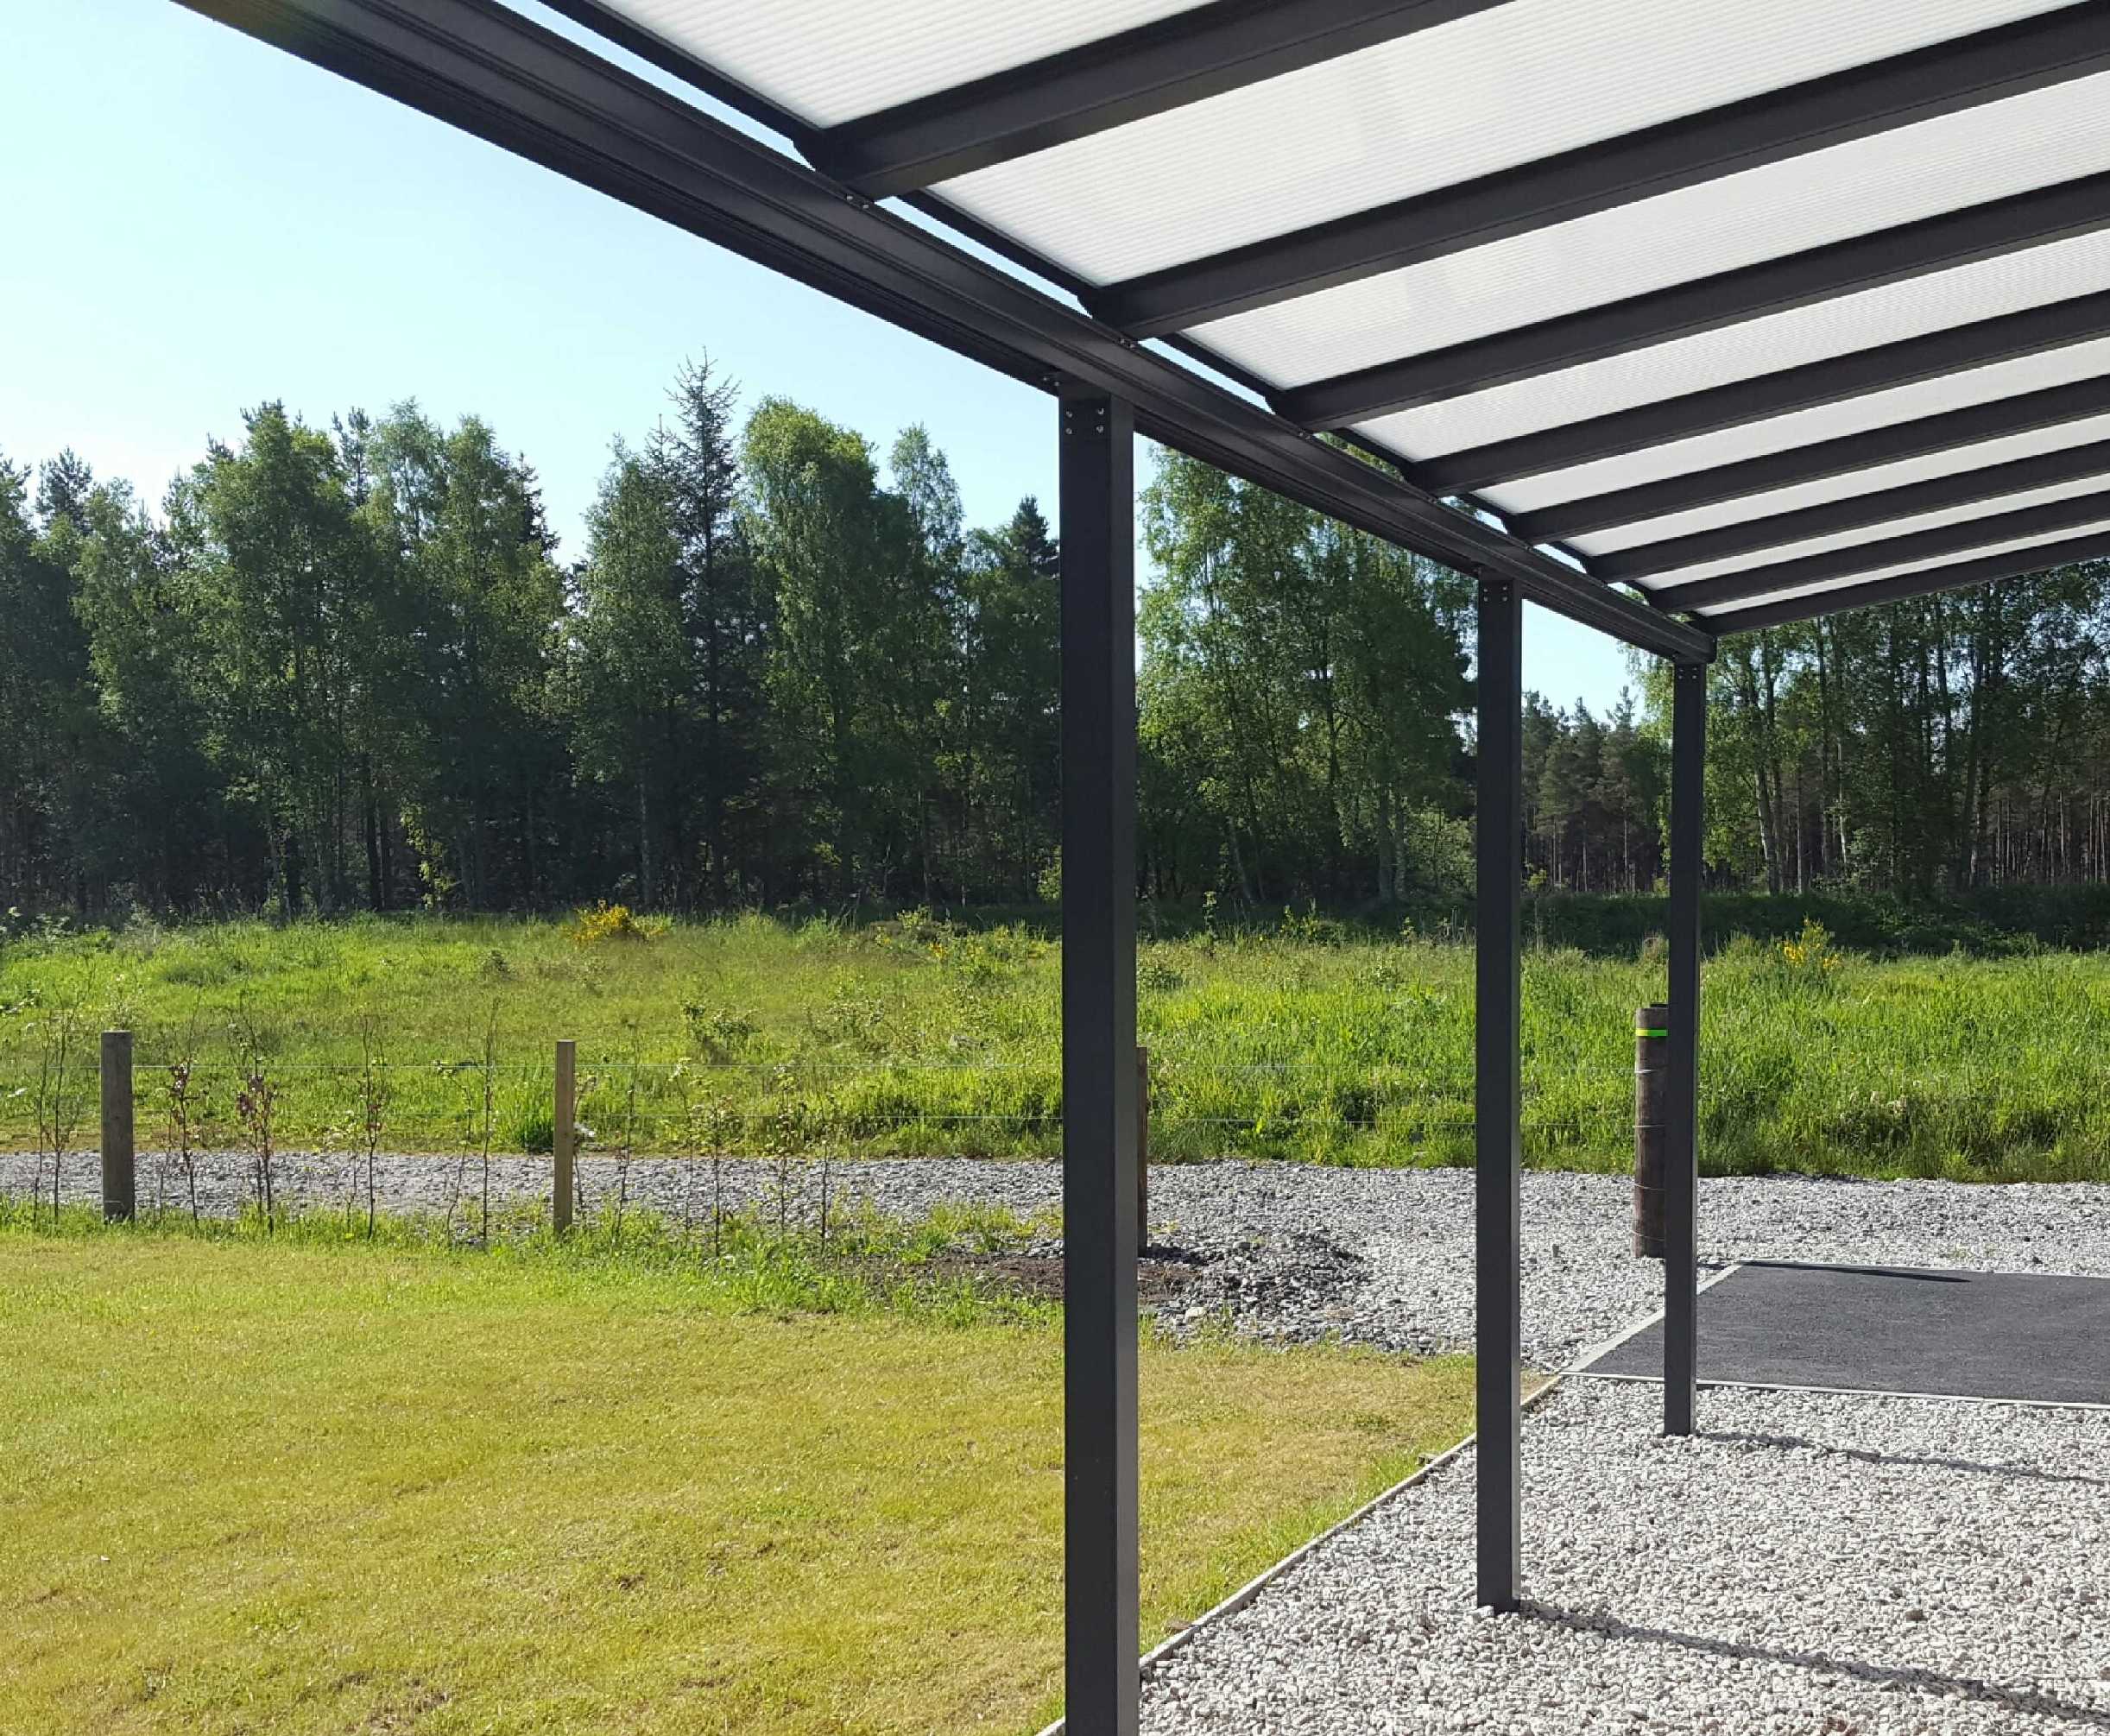 Omega Smart Lean-To Canopy, Anthracite Grey, UNGLAZED for 6mm Glazing - 6.3m (W) x 2.0m (P), (4) Supporting Posts